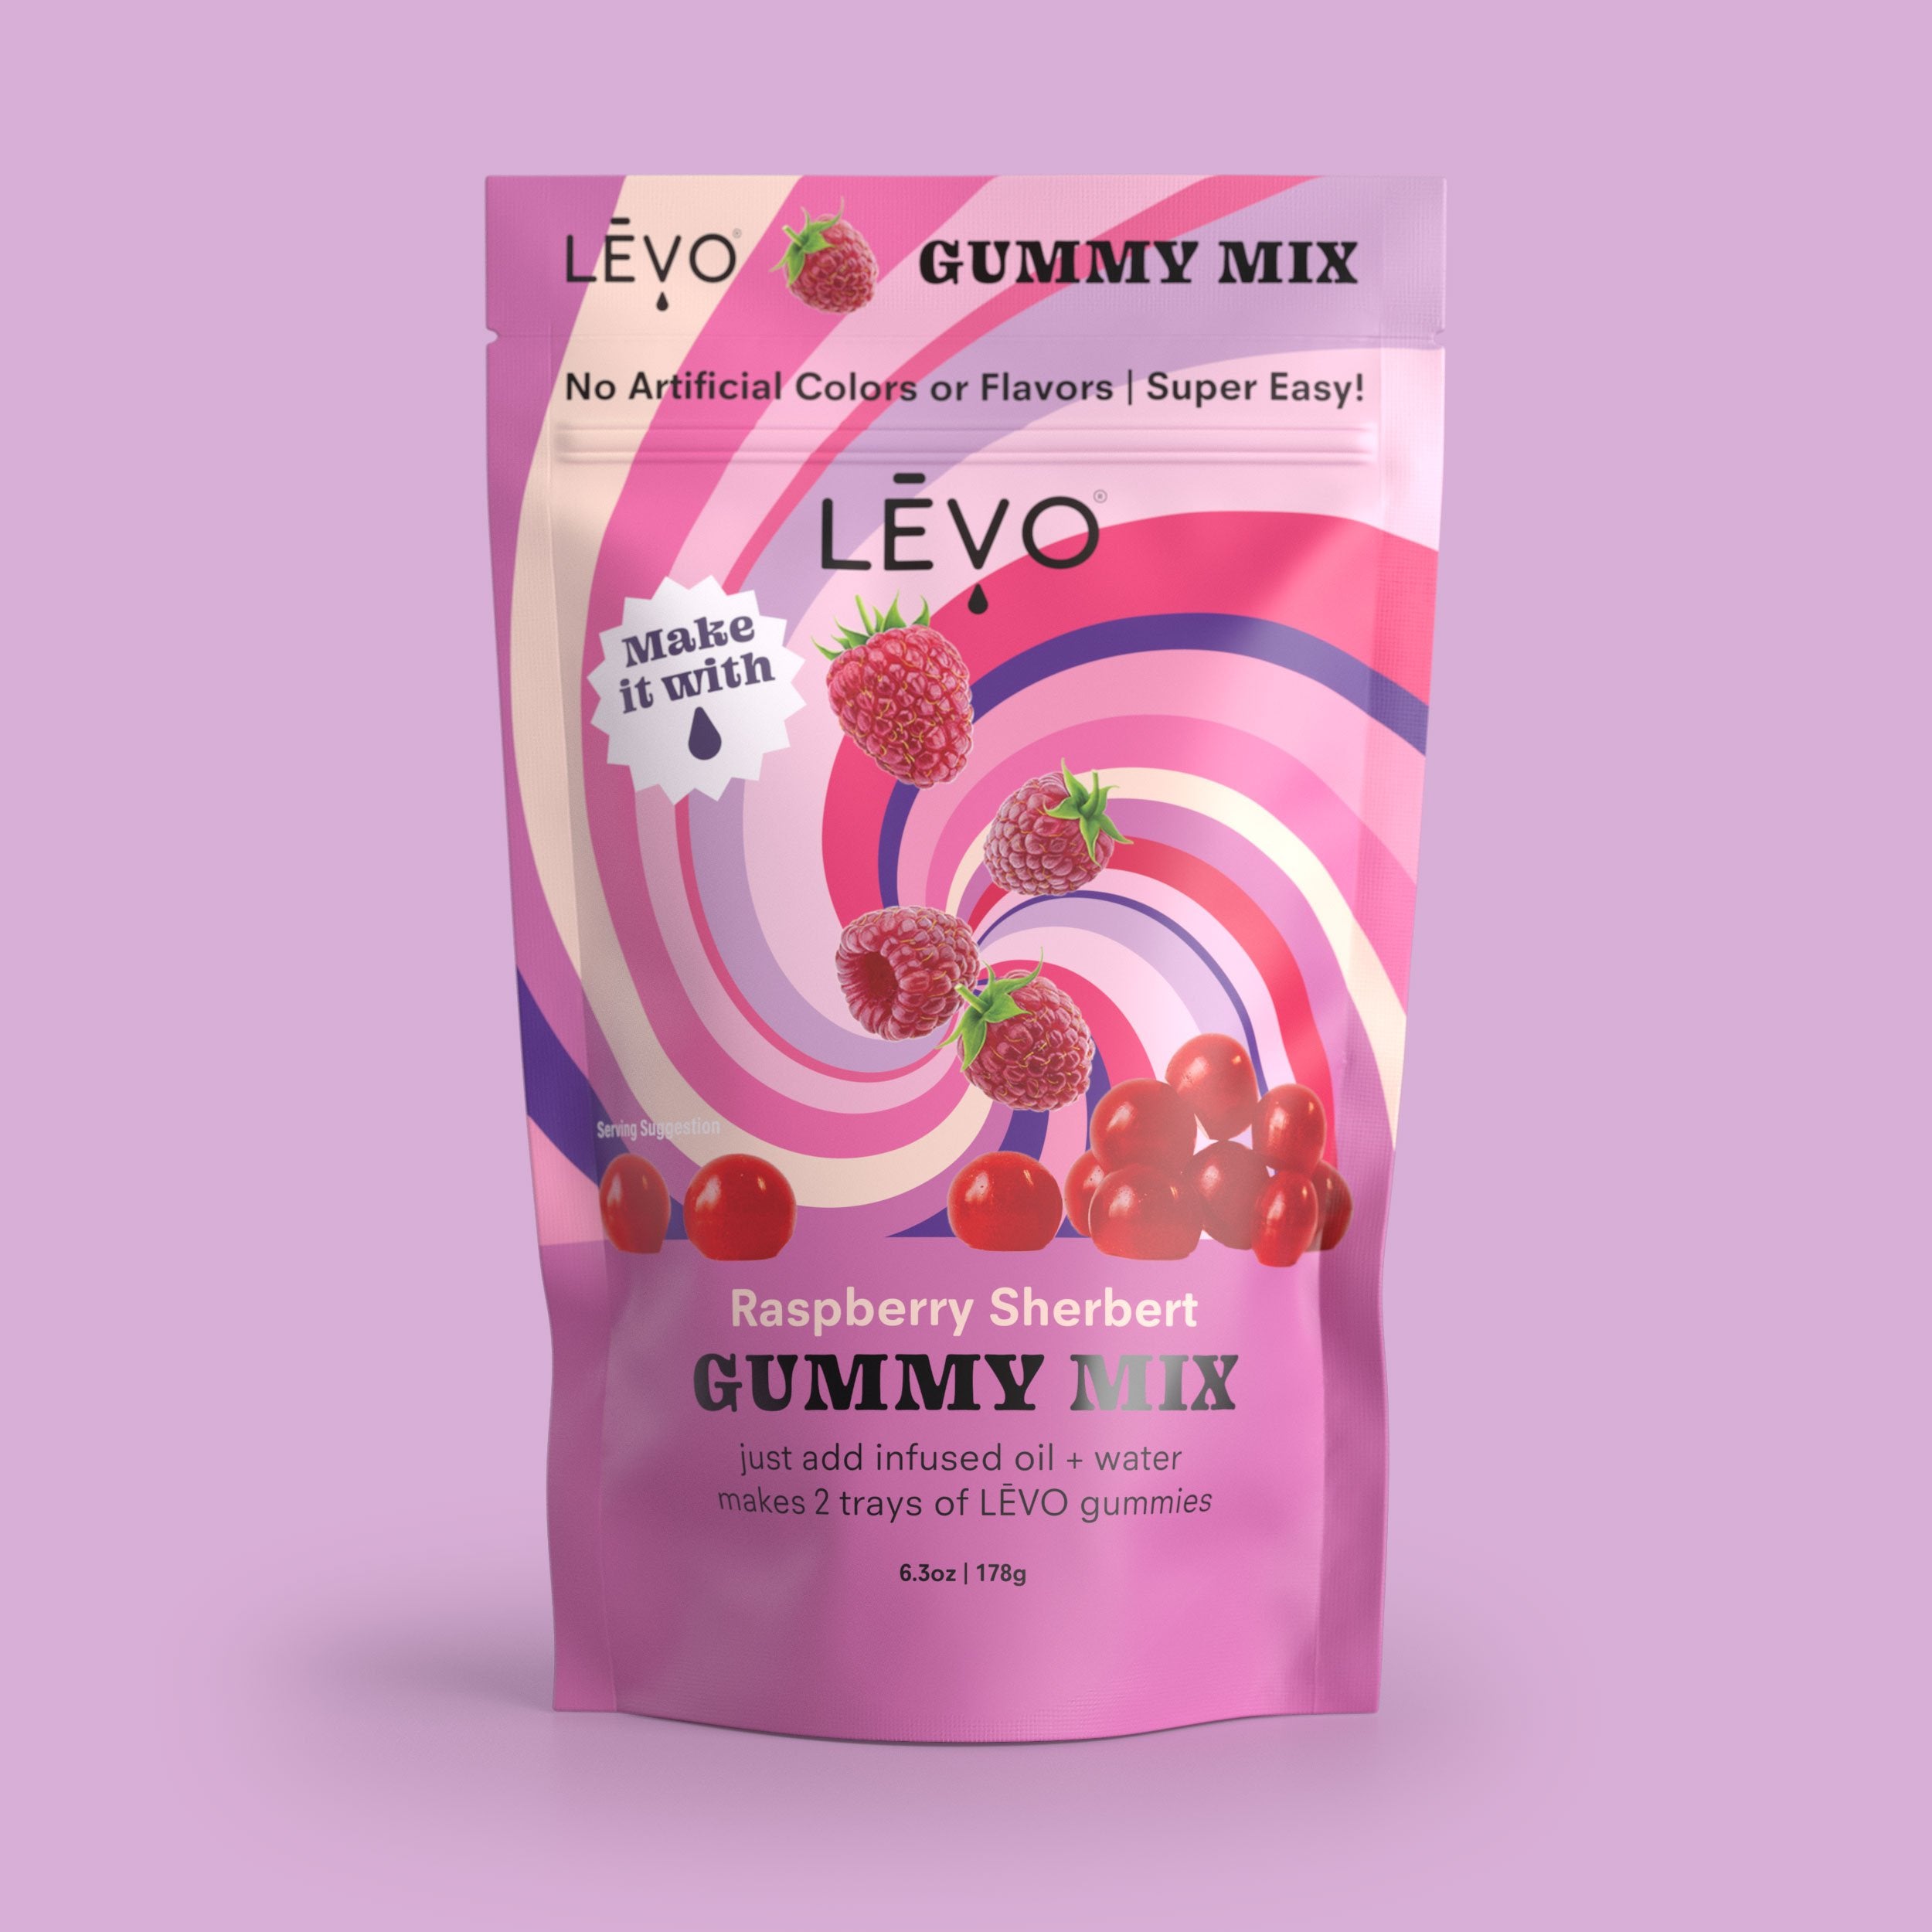 LEVO gummy mix pouches fill both silicone LEVO gummy trays. Make 64 3mL gummies from just one pouch, using 2-4 Tablespoons of your homemade LEVO oil.